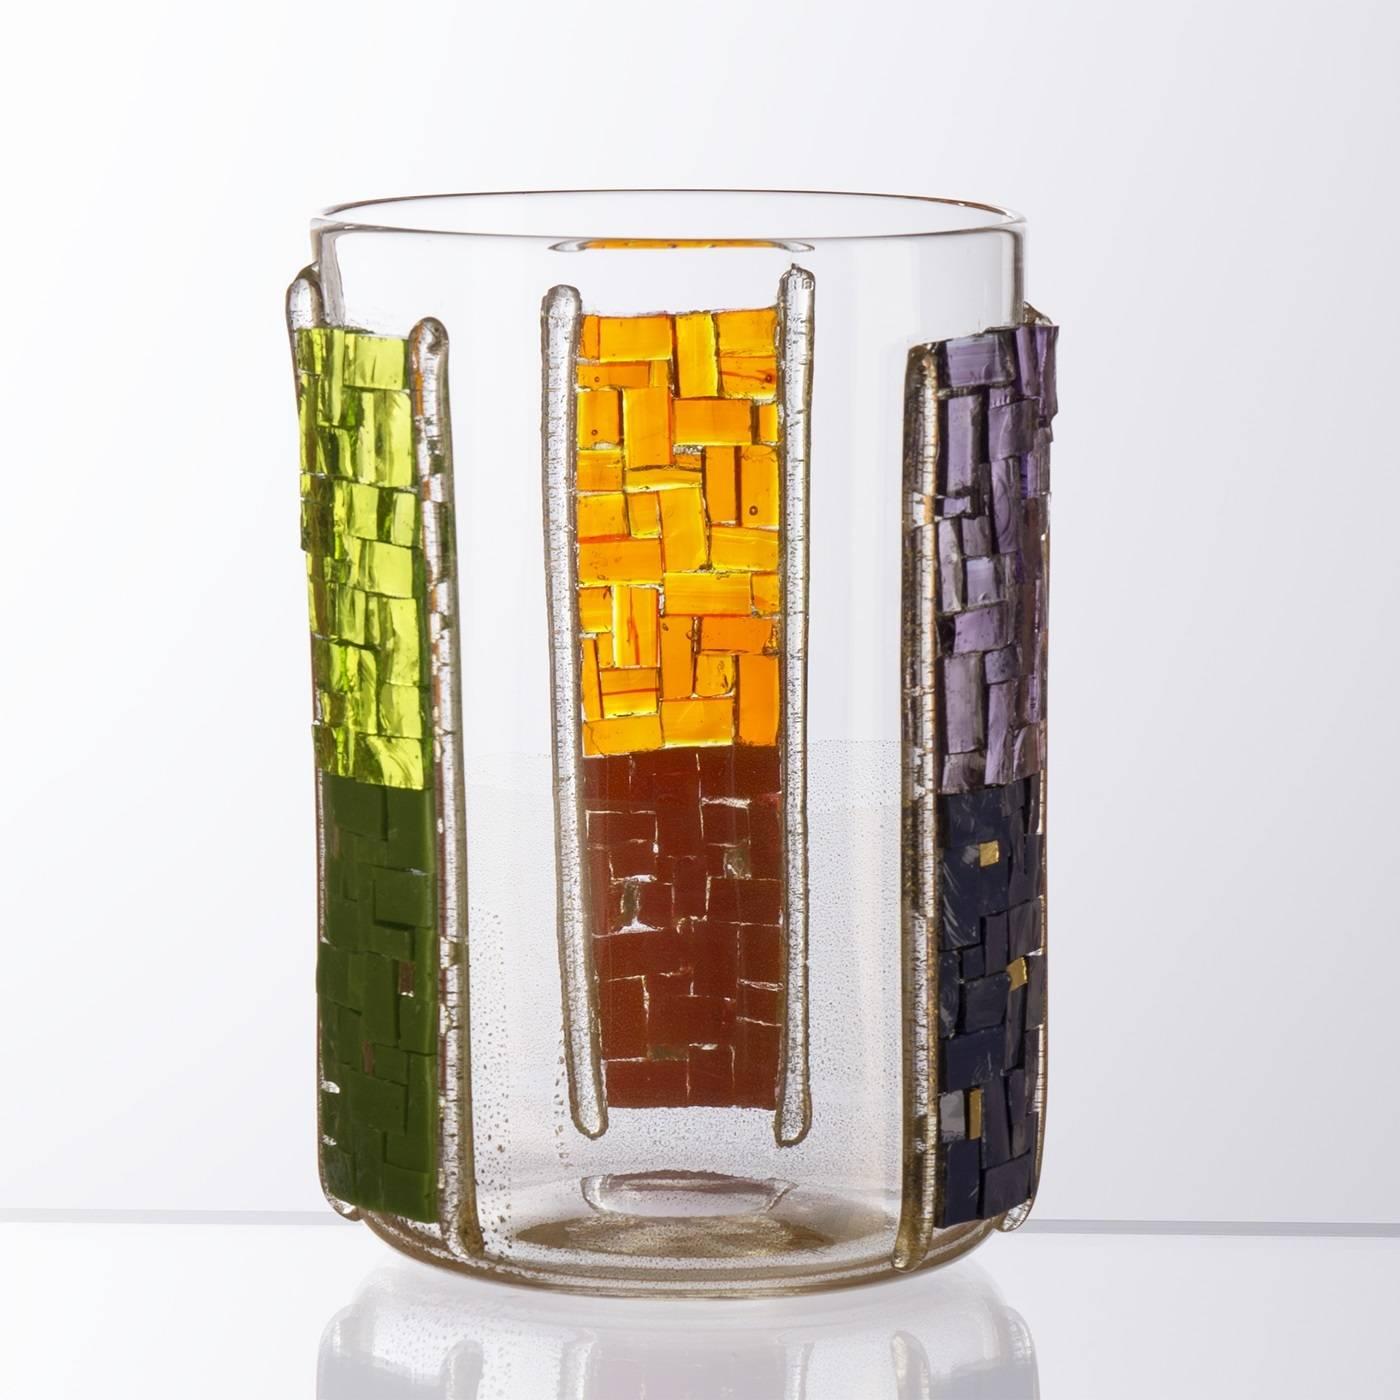 Part of the Tableware collection this colorful candle holder is made of Murano mouth-blown clear glass with three mosaic stripes in secondary colors: green, orange, and purple that have been applied 